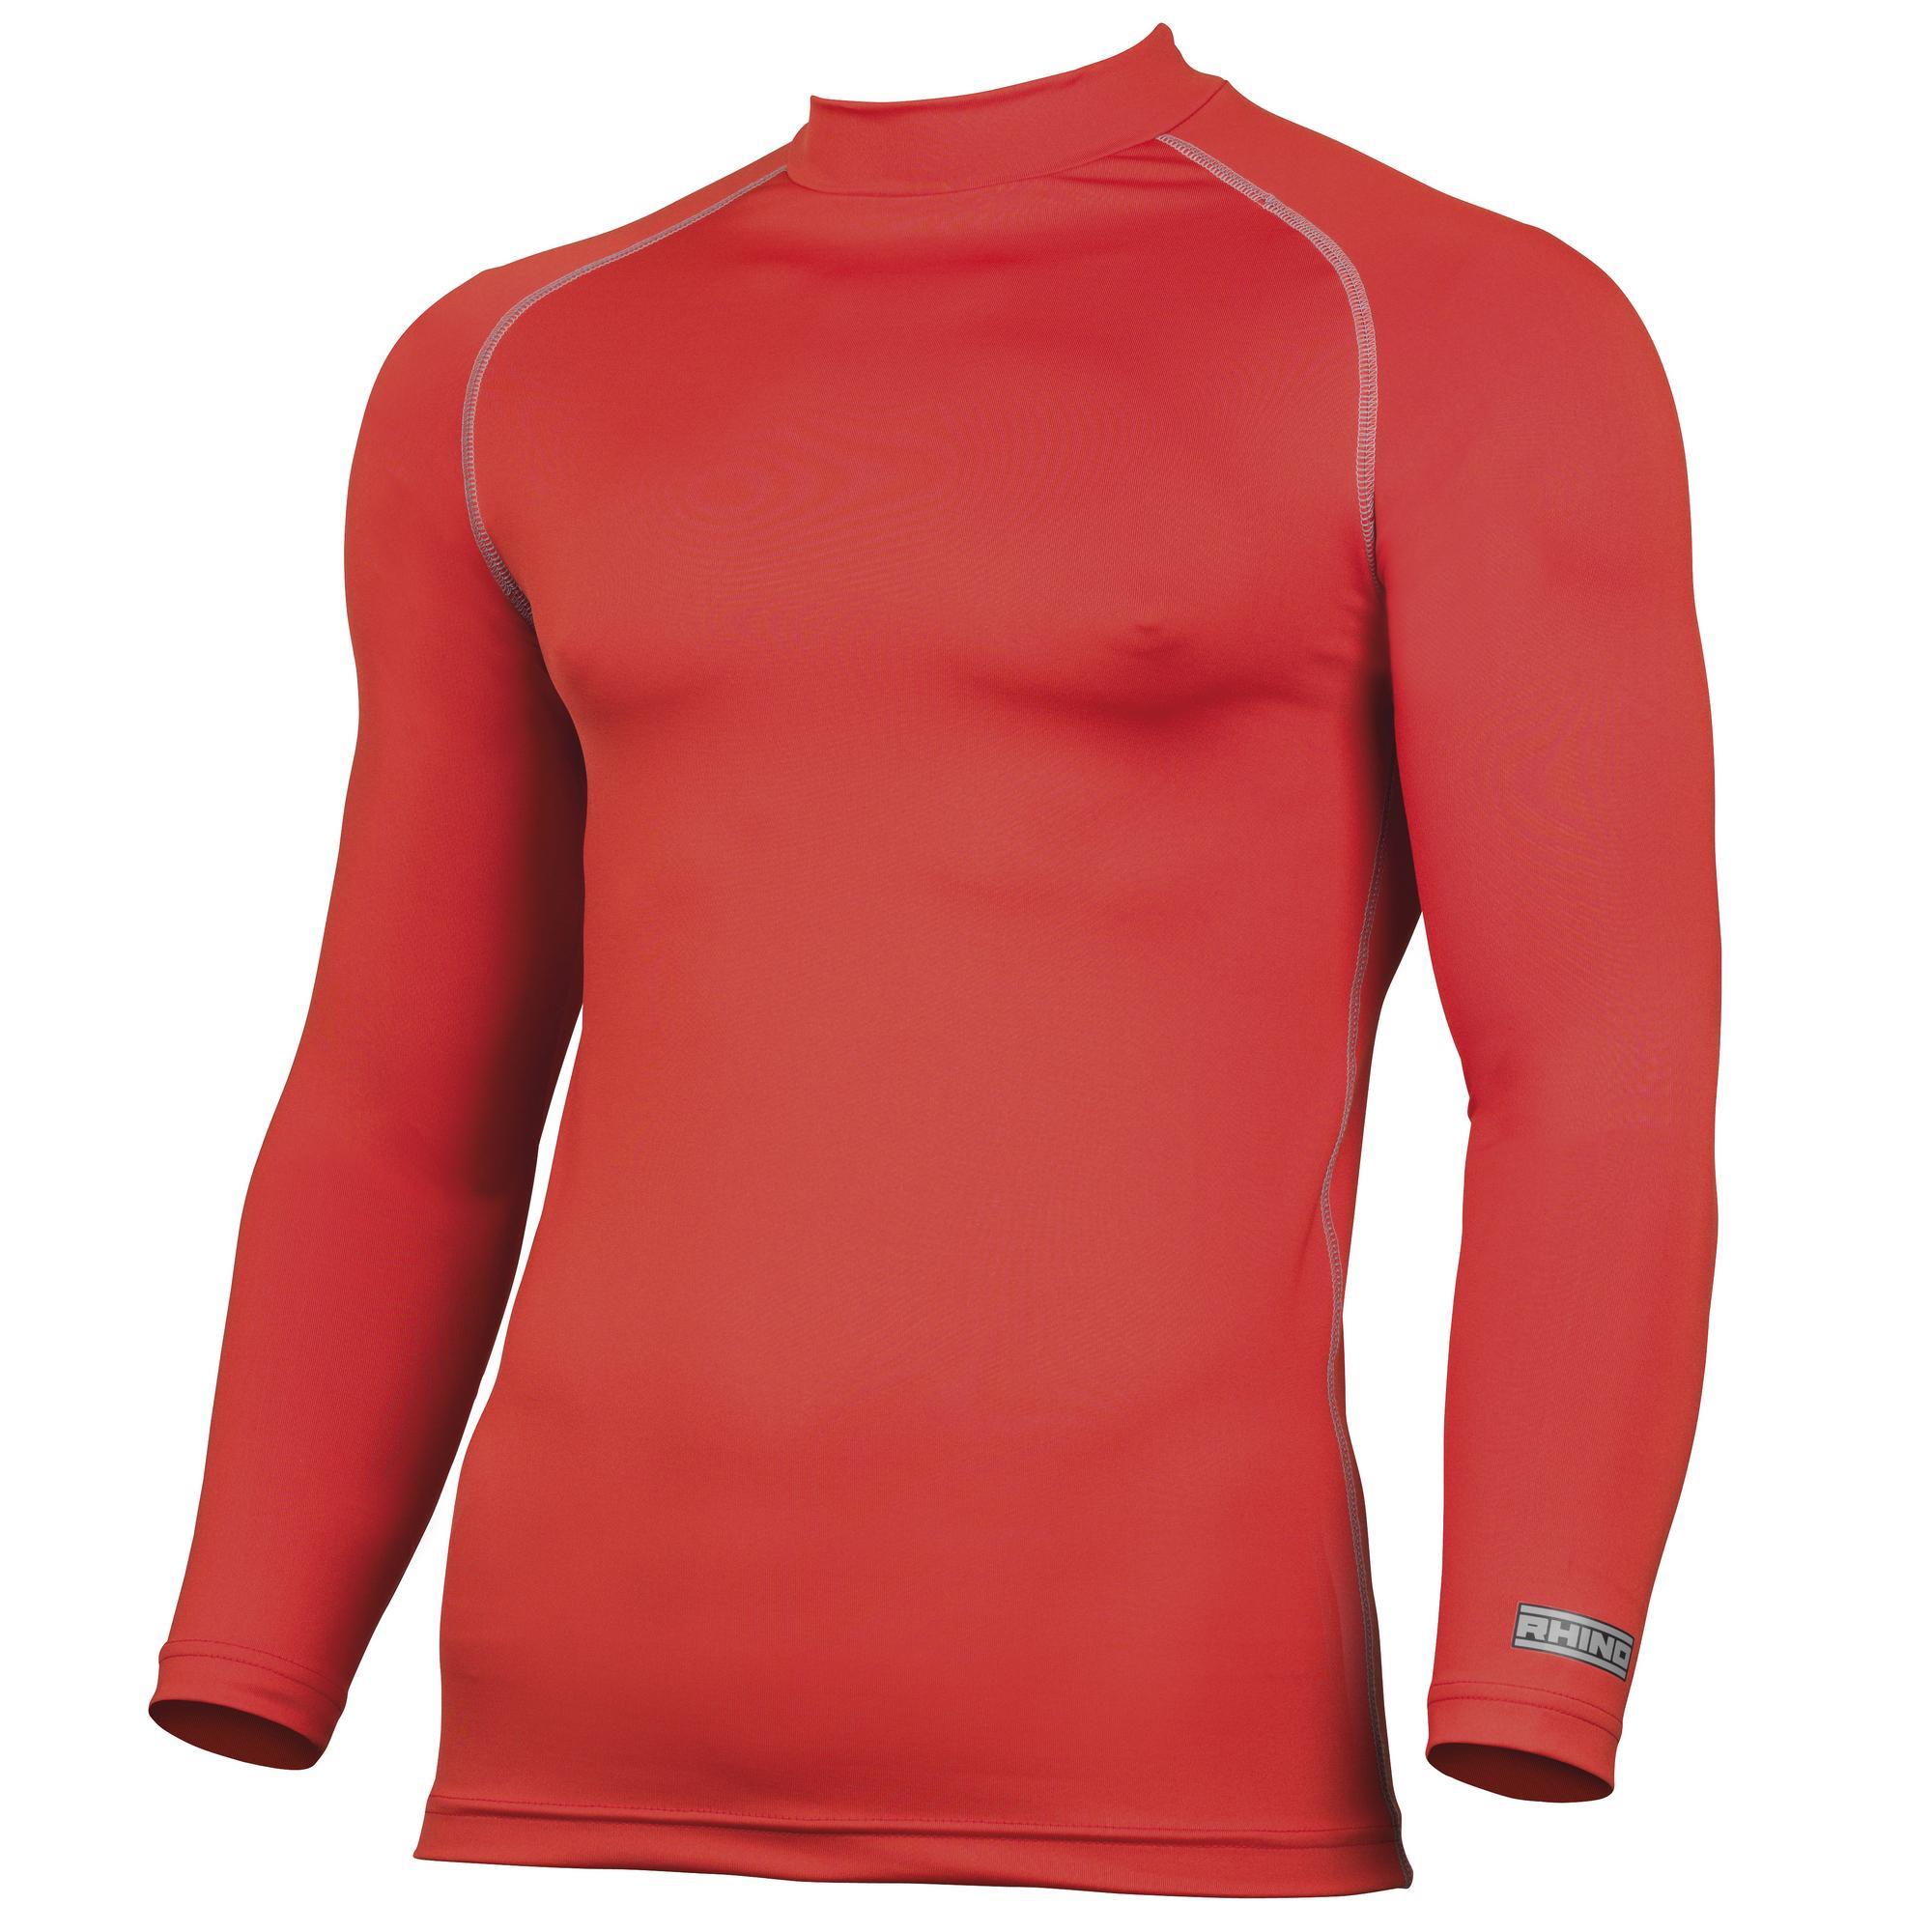 Rhino Mens Thermal Underwear Long Sleeve Base Layer Vest Top (Red) (3XL)